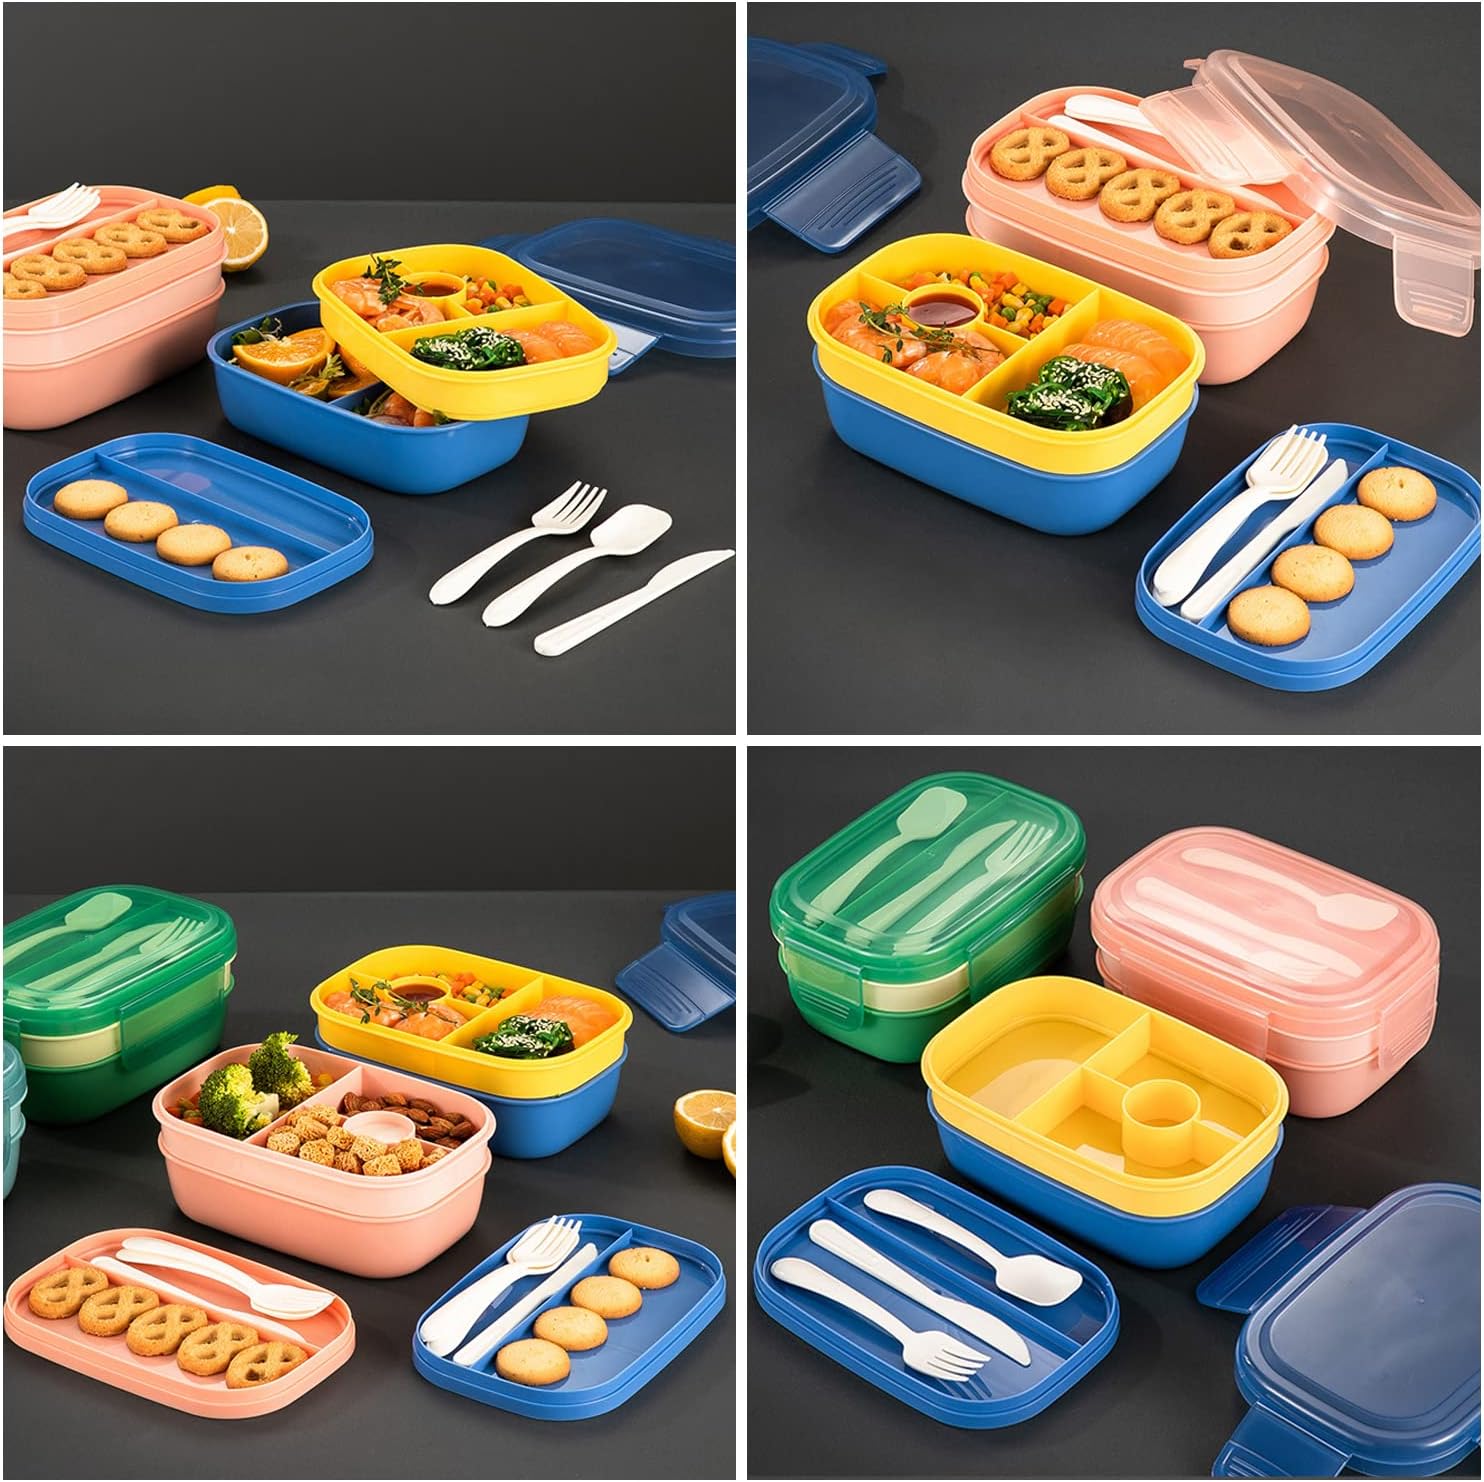 Bento Box, 3 Stackable Bento Lunch Containers for Adults/Kids, Modern Minimalist Design Bento Box with Utensil Set, Leakproof Lunchbox Bento Box for Dining Out, Work, Picnic, School